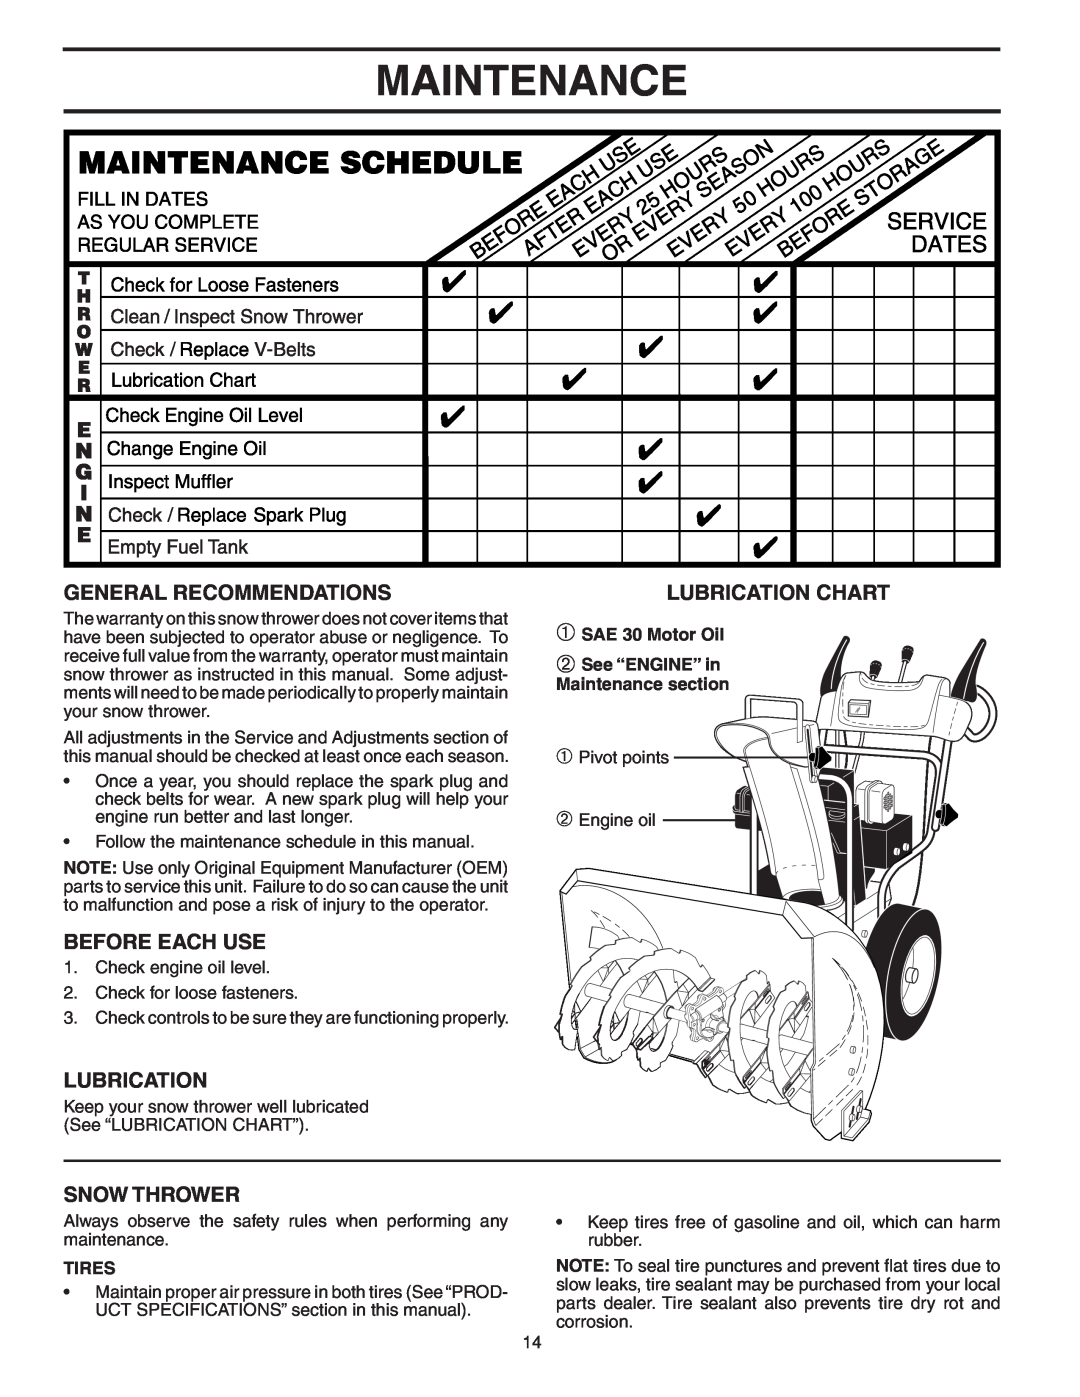 Poulan 189645 Maintenance, General Recommendations, Before Each Use, Snow Thrower, Lubrication Chart, Tires 